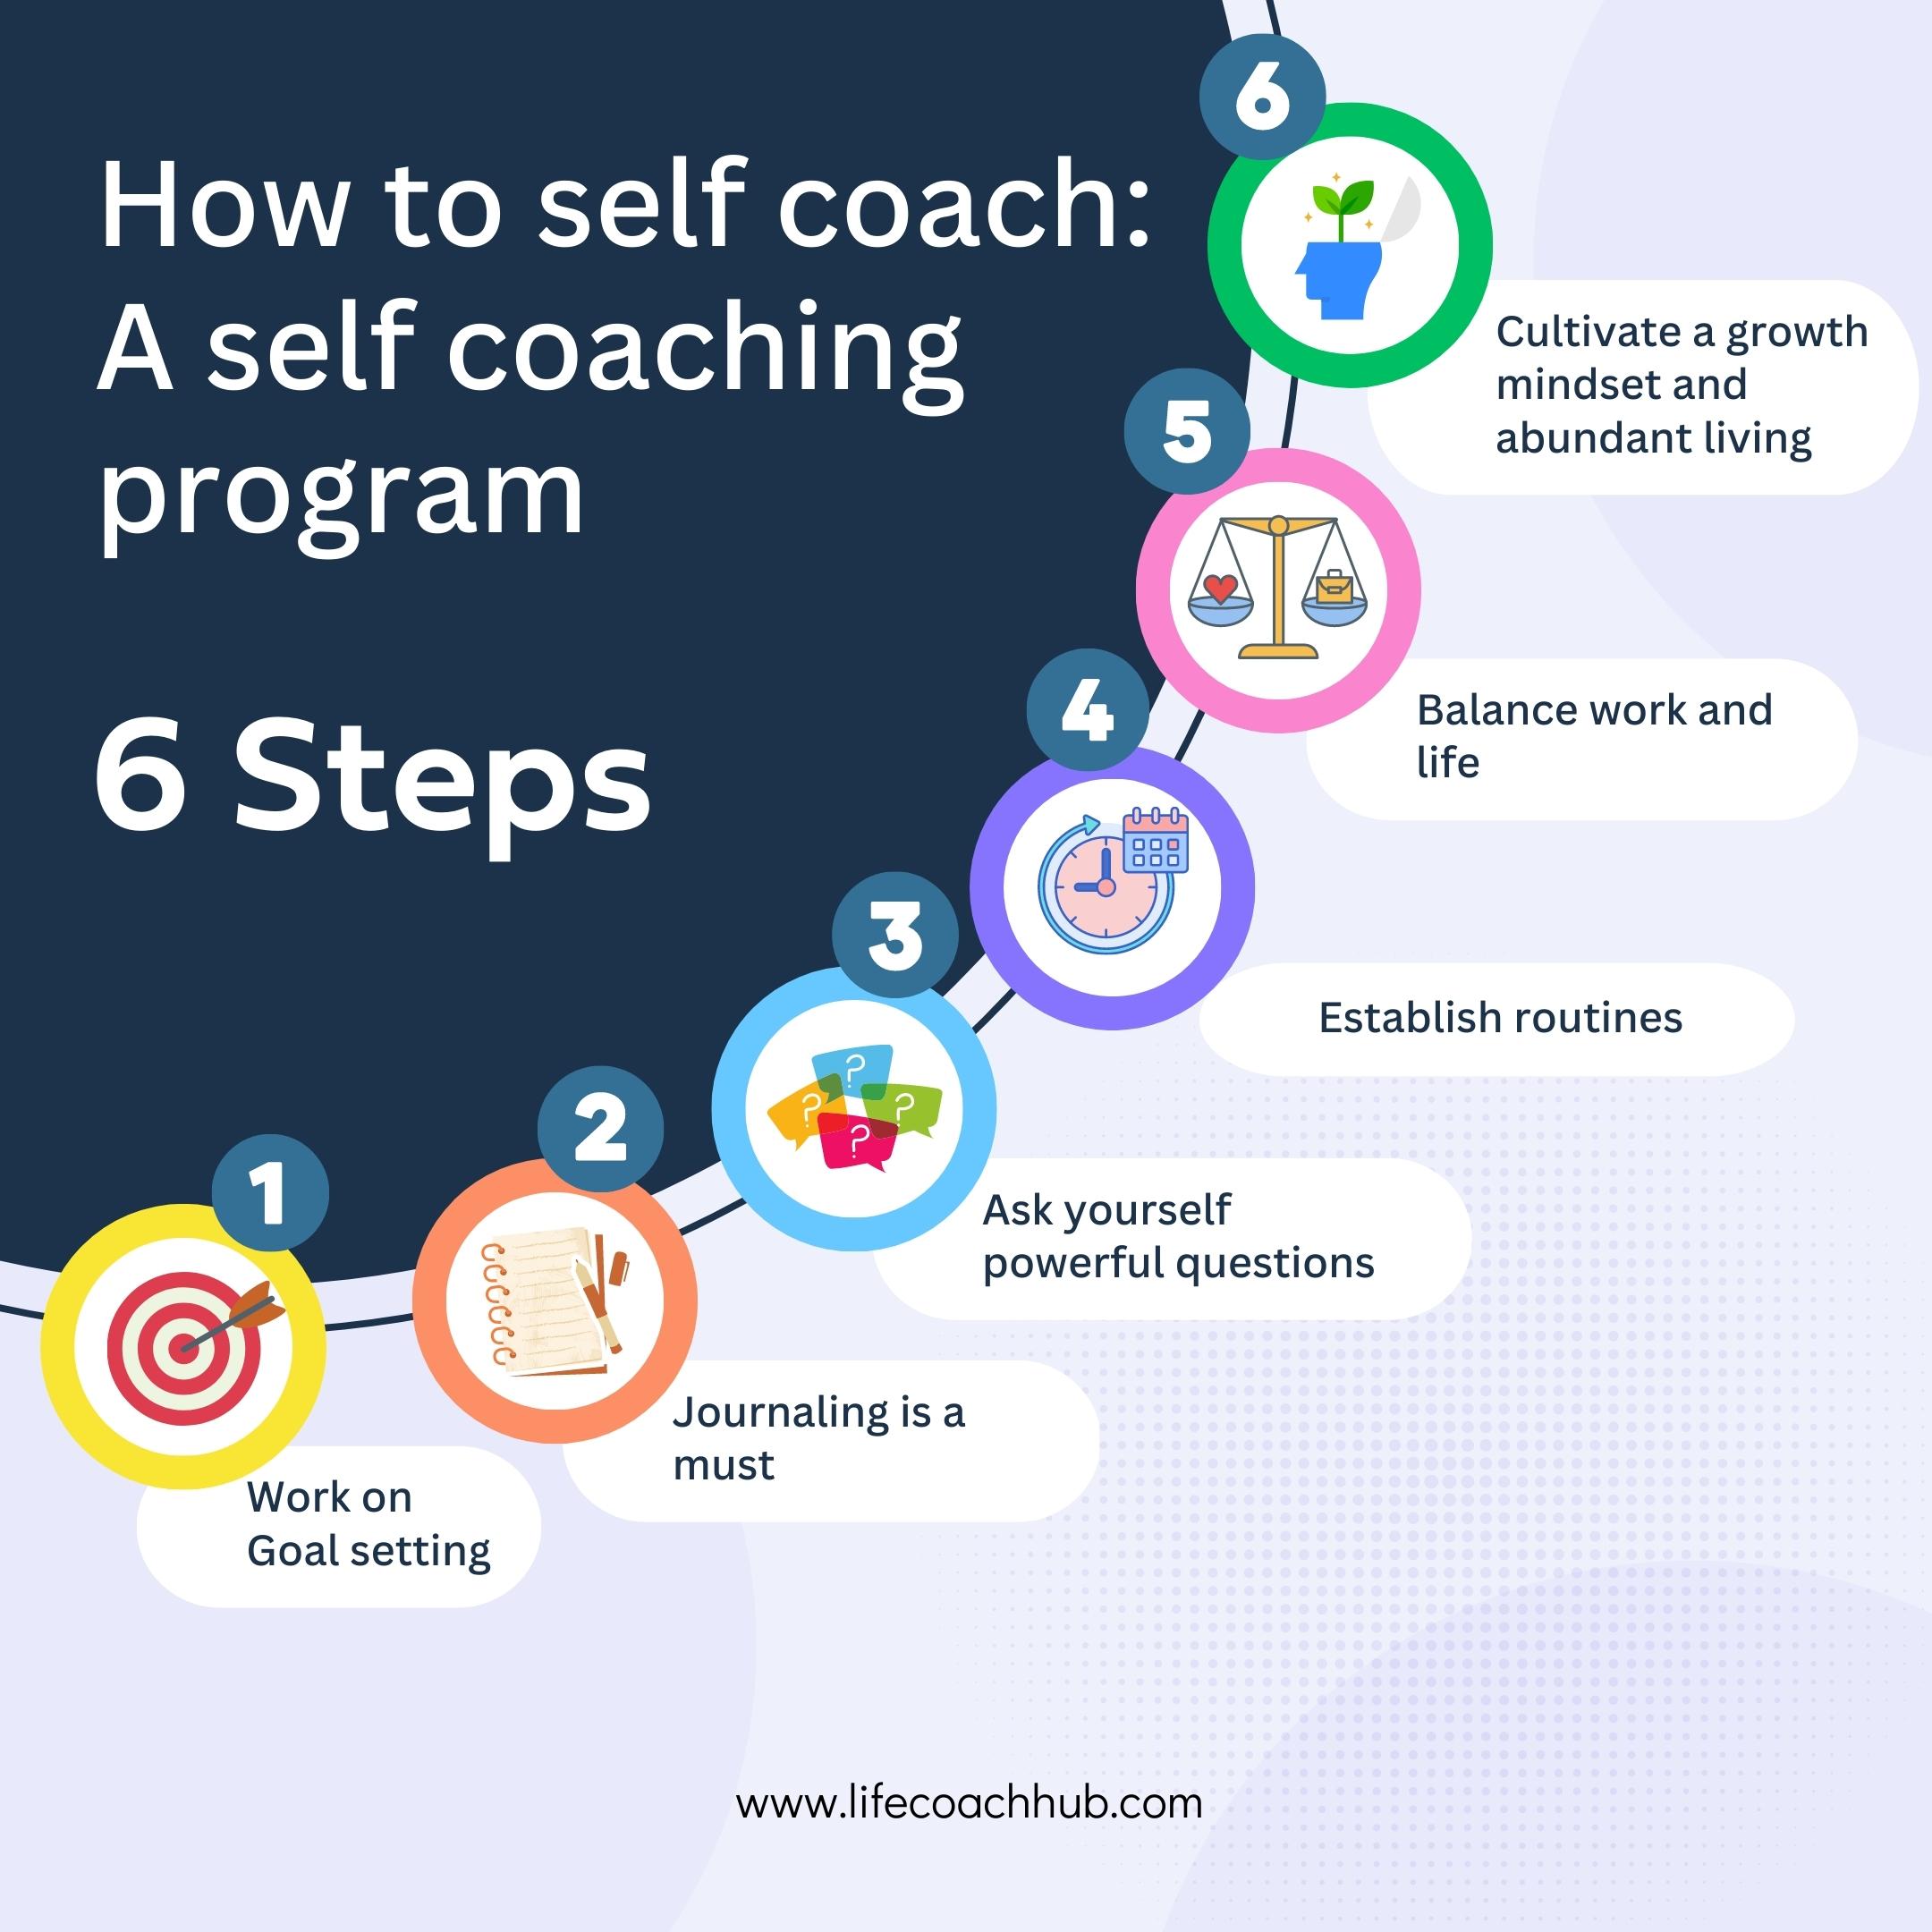 How to self coach: 6 steps